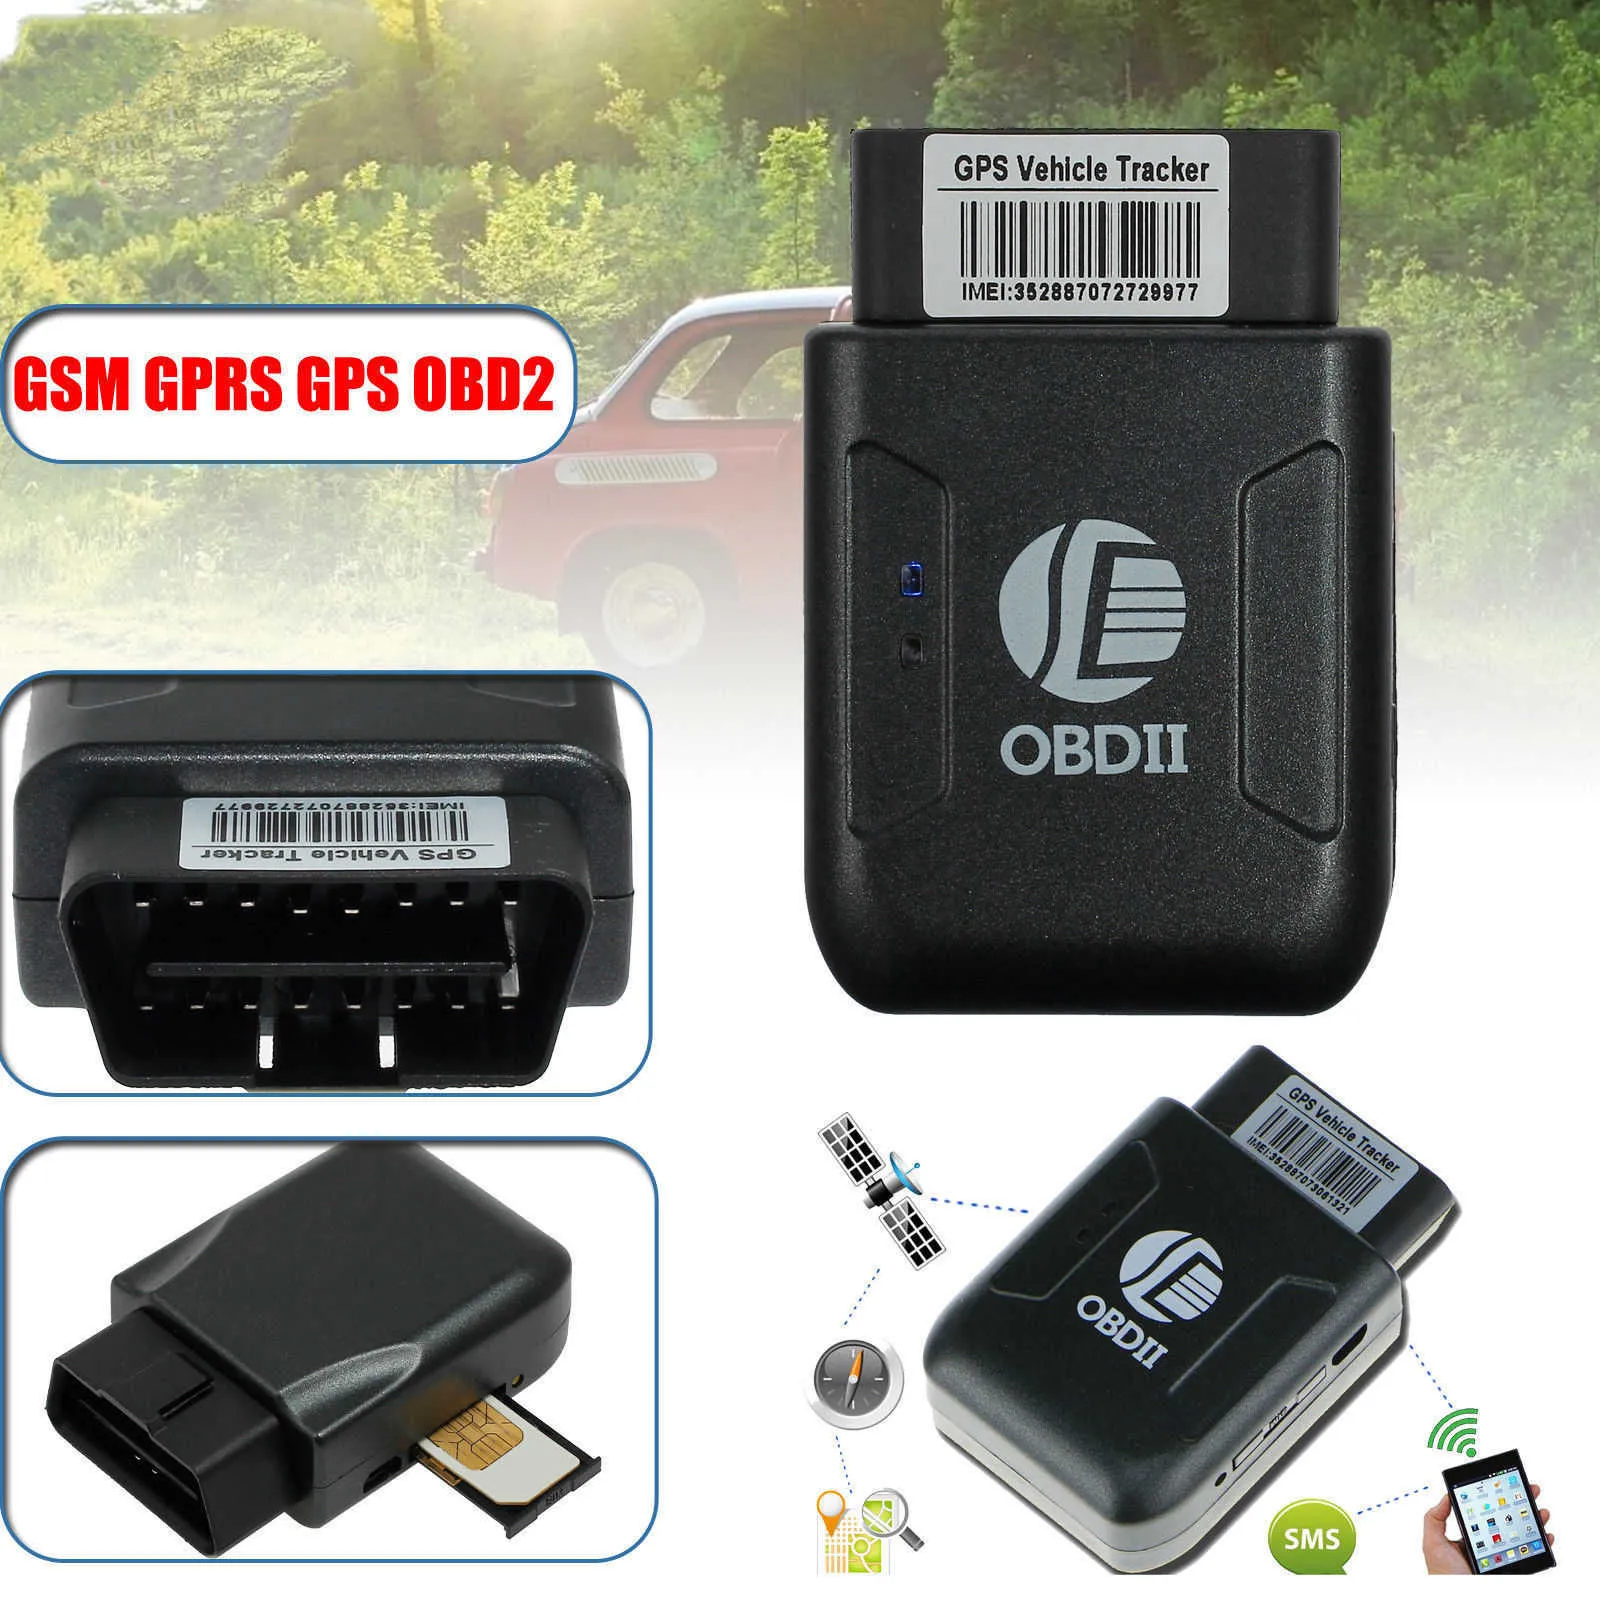 Lightning GPS OBD-II Plug-In Real-Time Vehicle Tracking Device for Cars &  Teens